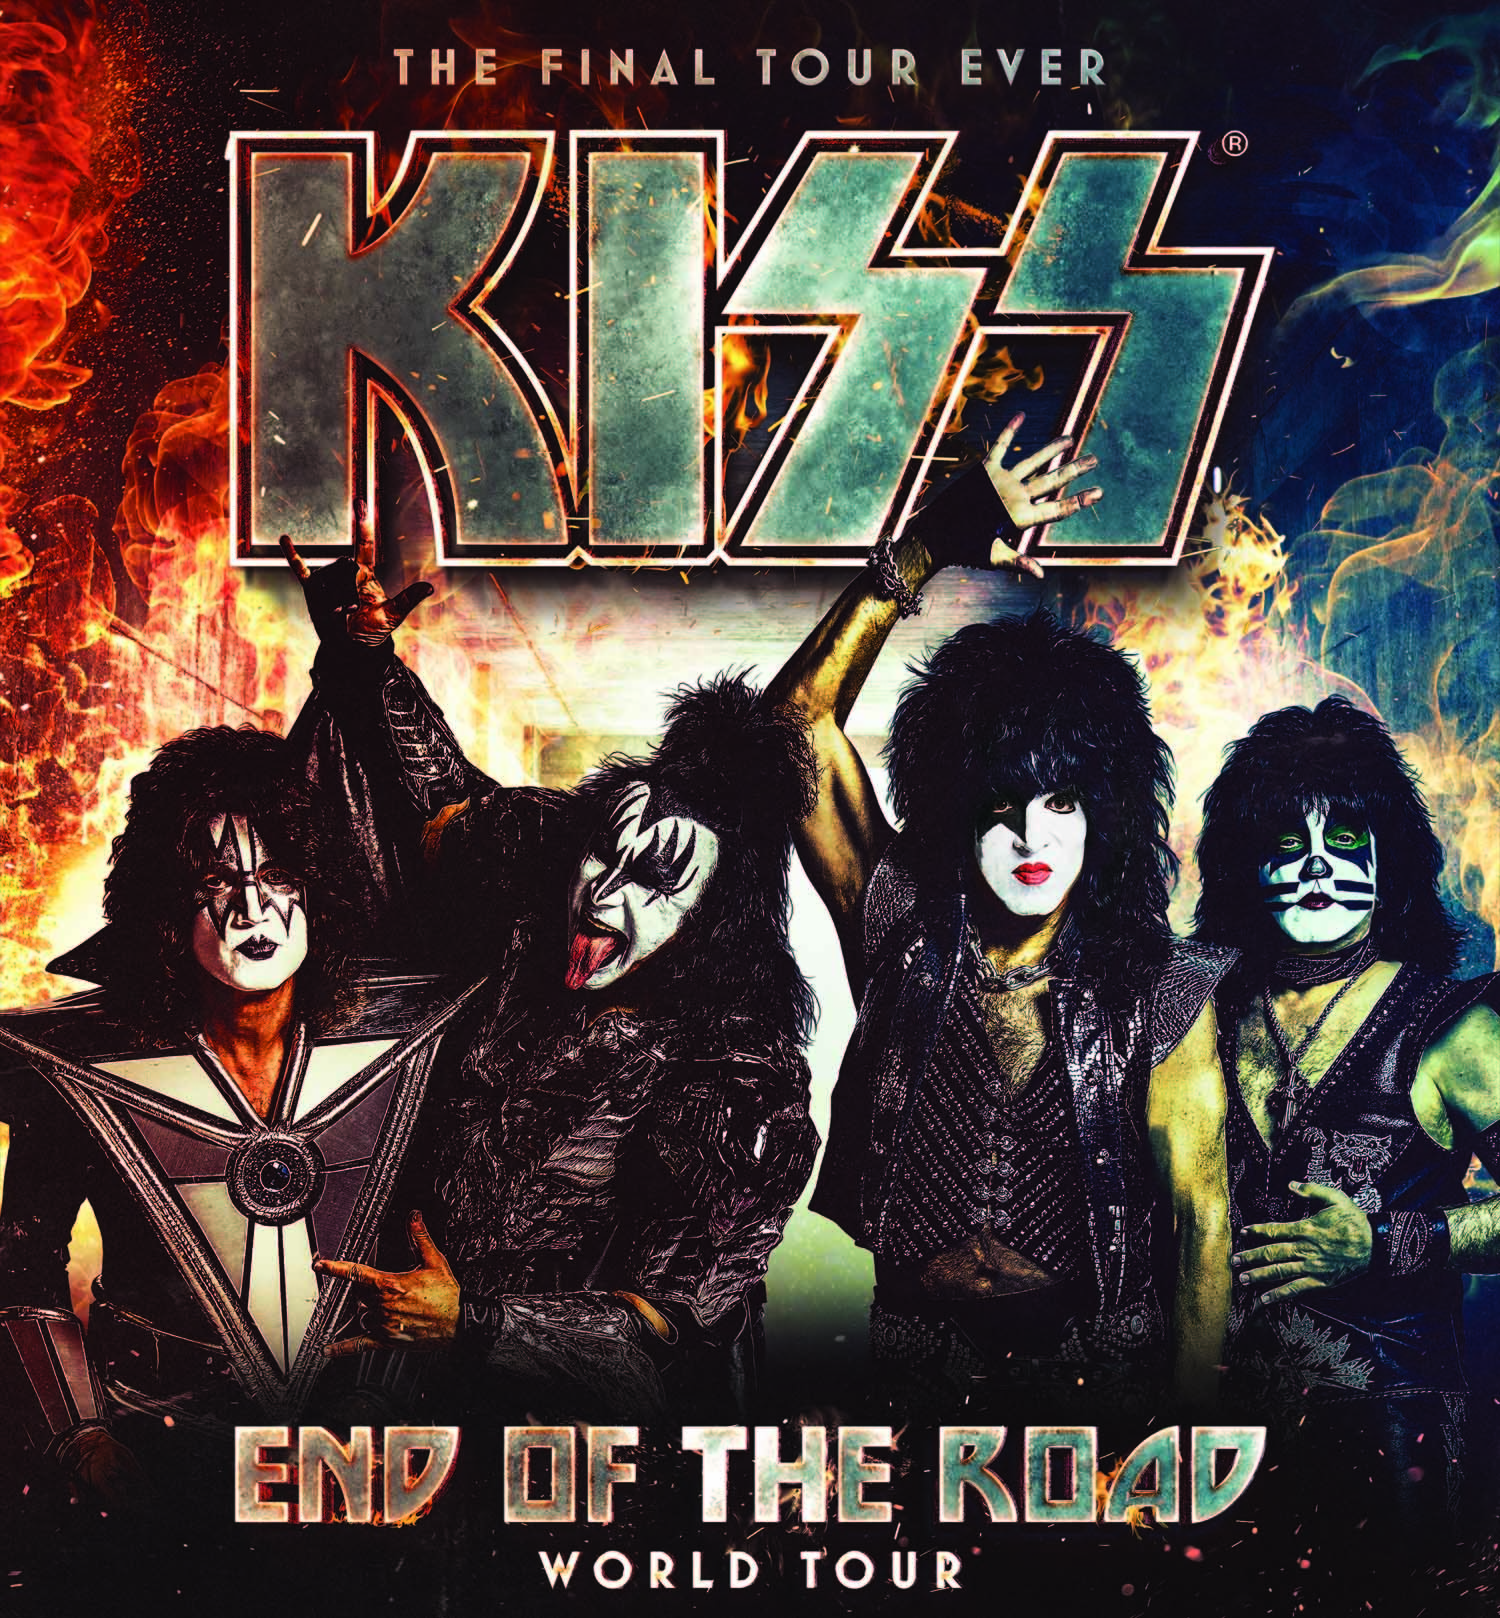 KISS
END OF THE ROAD WORLD TOUR